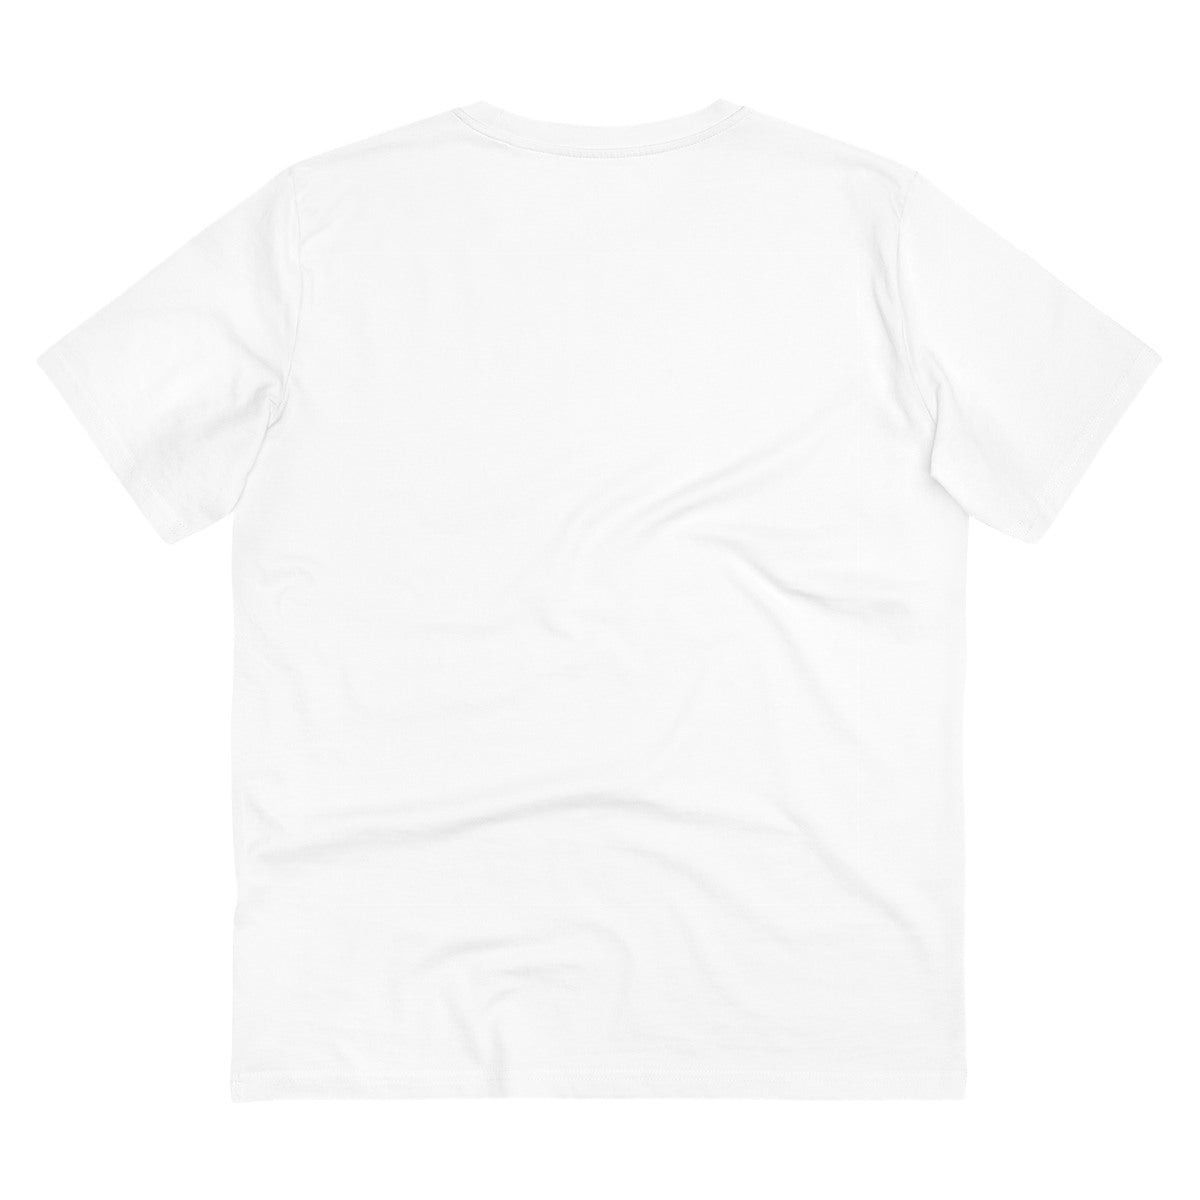 Men's PC Cotton 32nd Birthday Printed T Shirt (Color: White, Thread Count: 180GSM) - GillKart